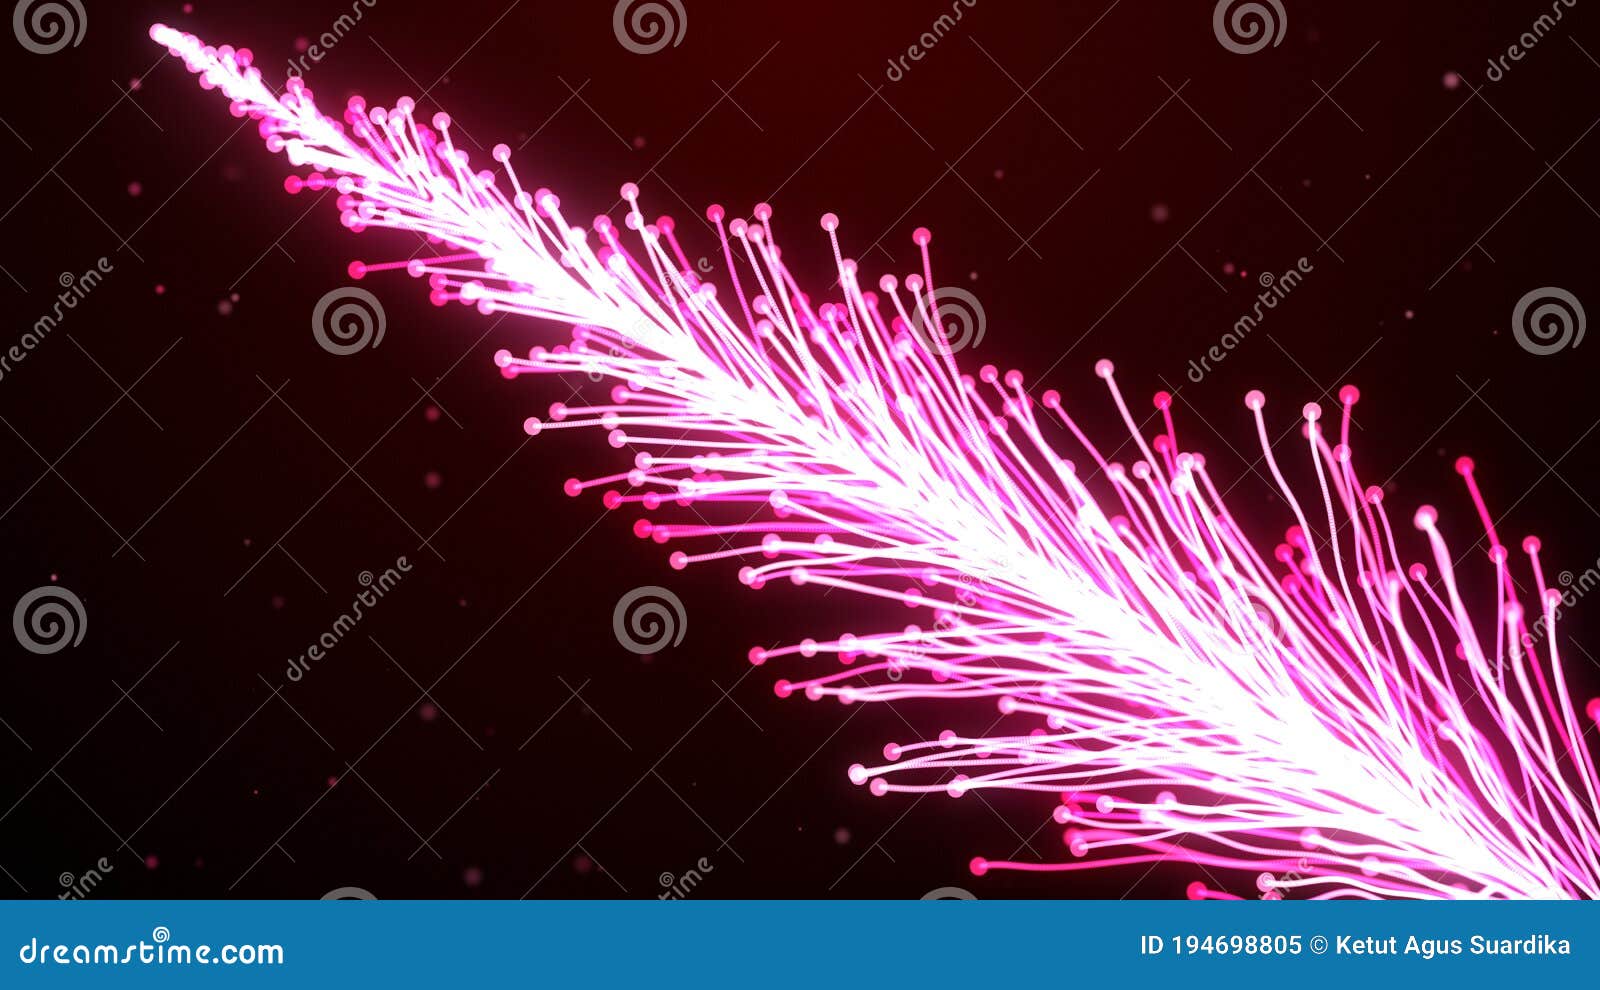 Abstract Red Glowing Light Pistil Of Flower Essence Turbulence Wavy Dots And Lines With Glitter Sparkle Dust Background